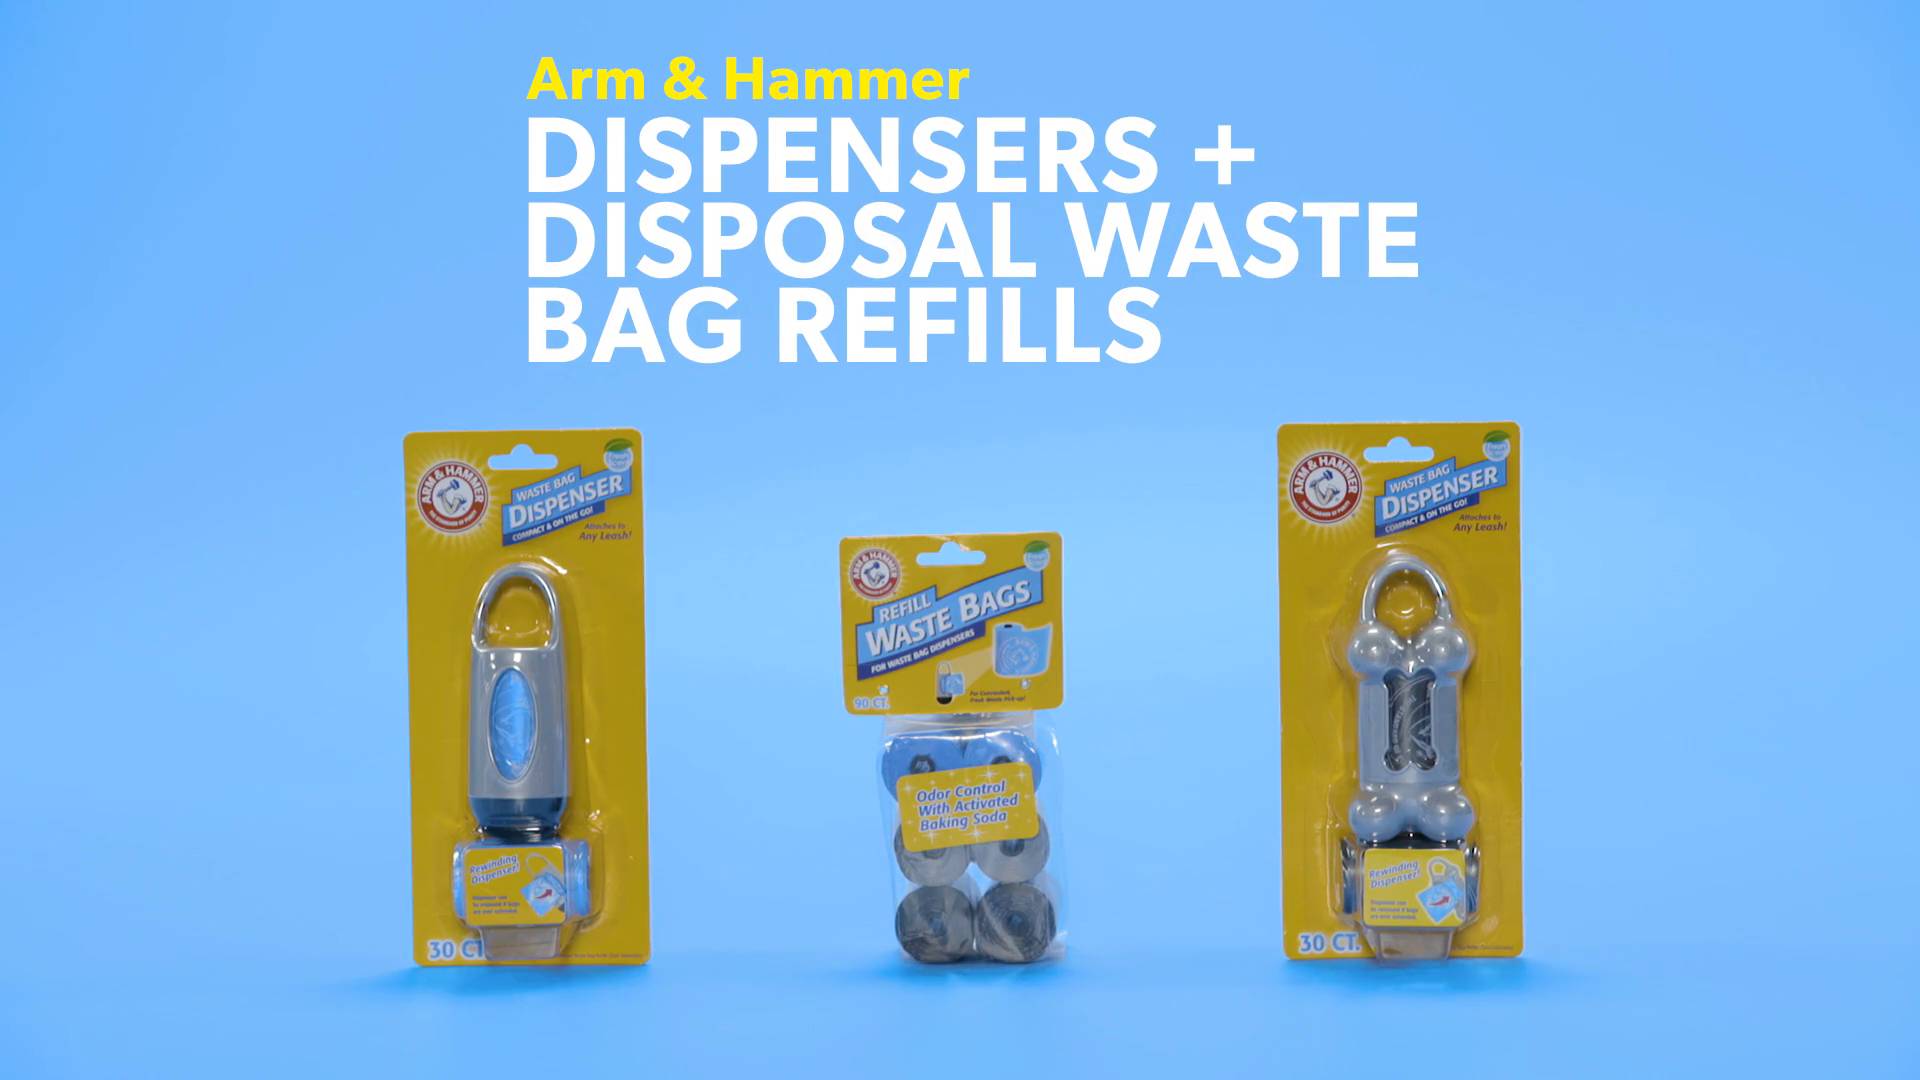 arm & hammer waste bags